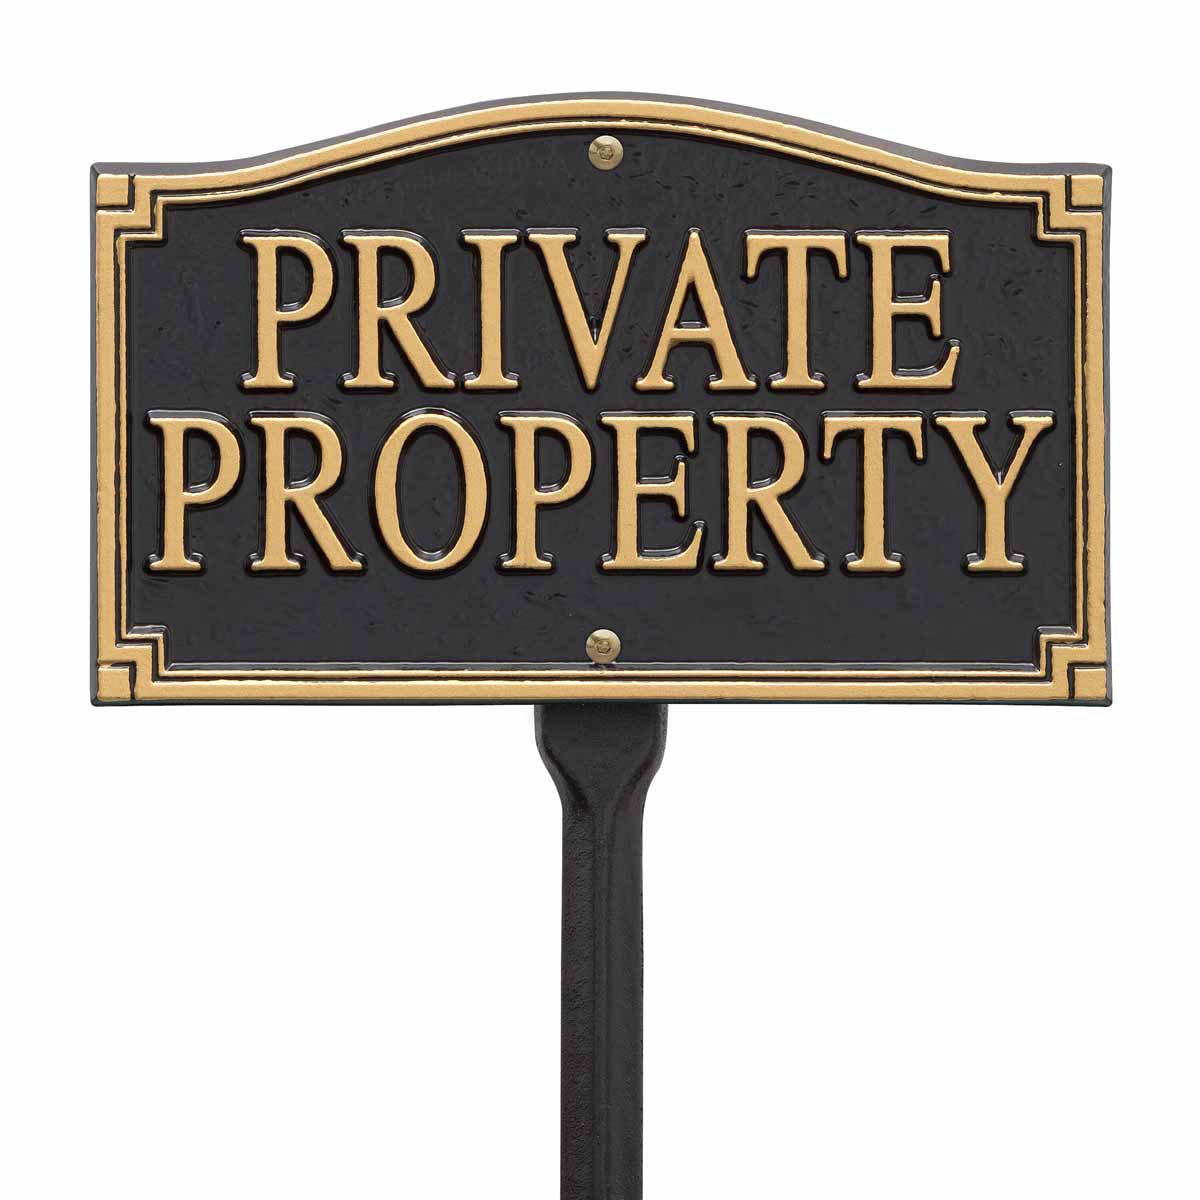 01430 Private Property Statement Plaque - Wall & Lawn - Black, Gold